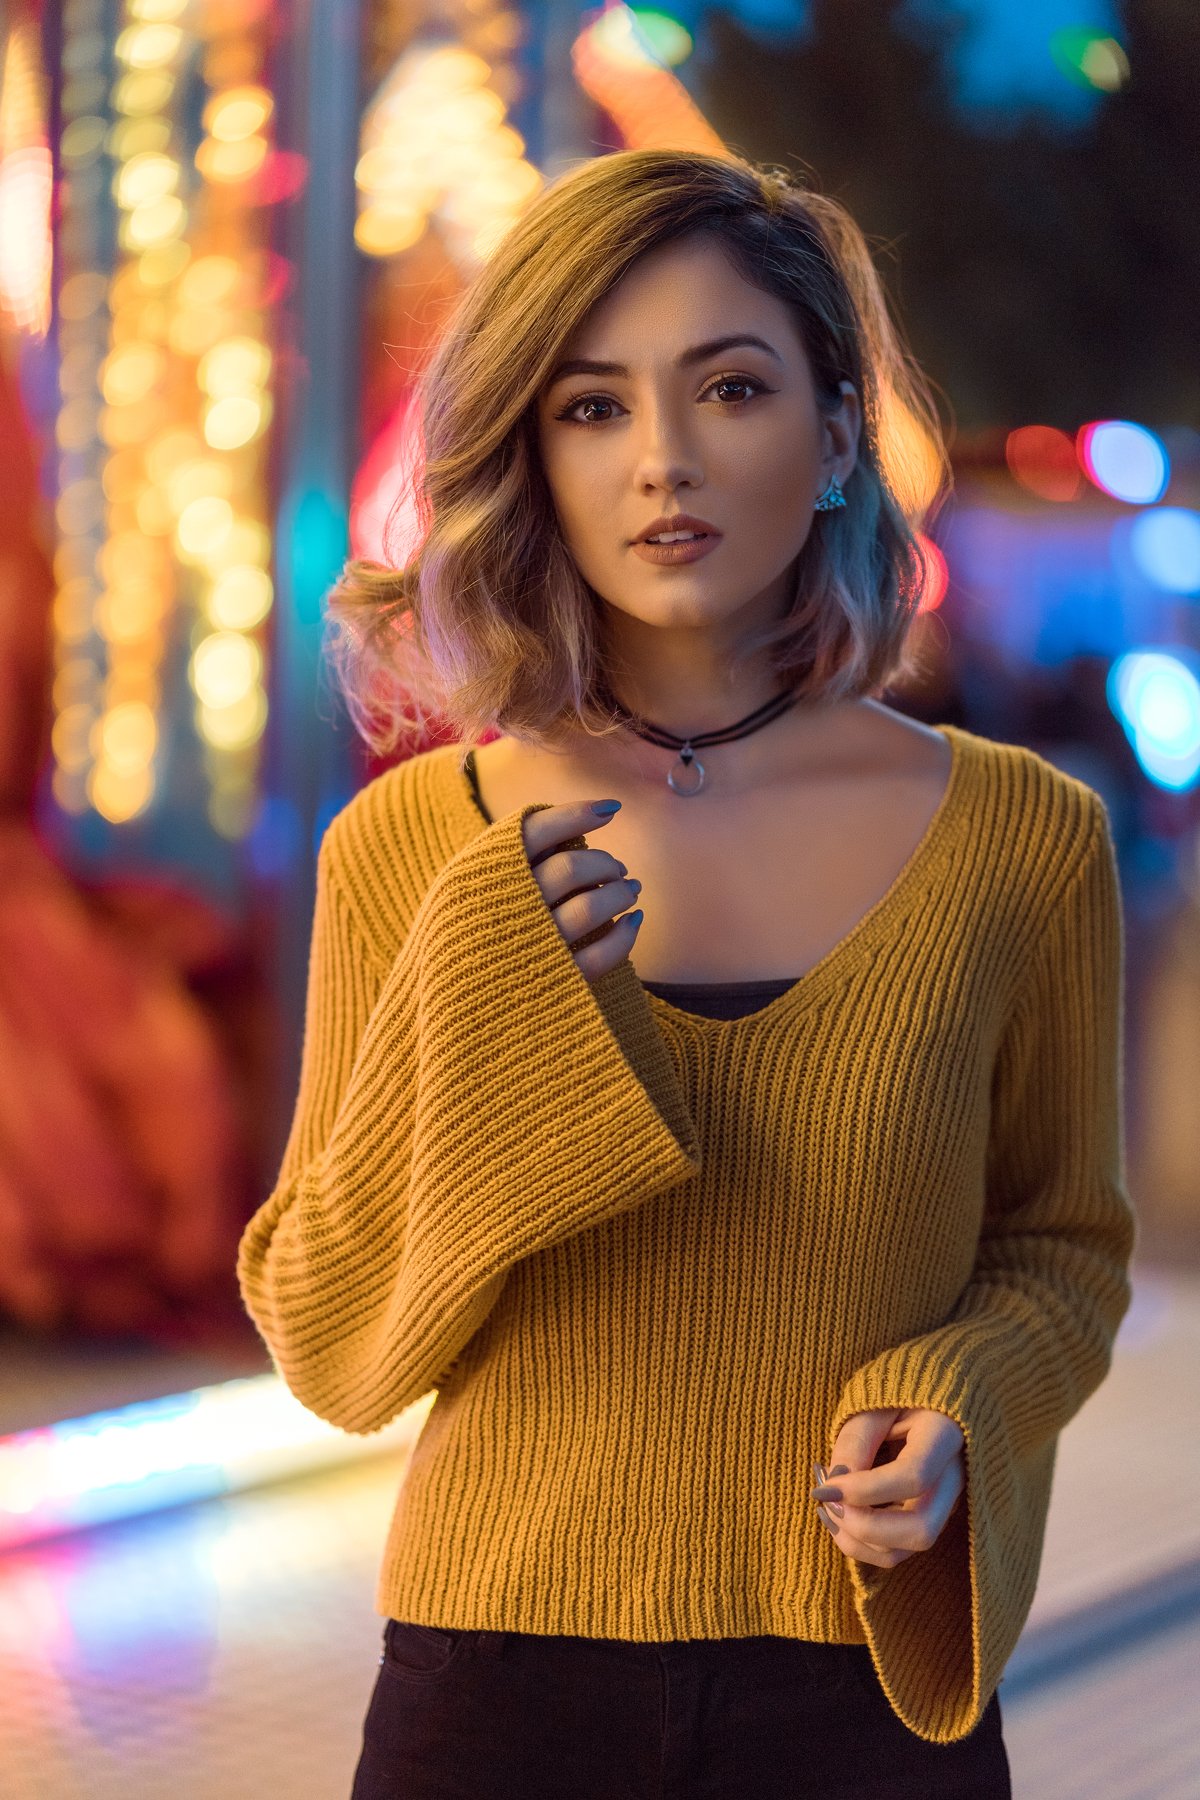 girl, model, blonde, young, cute, face, natural, light, outdoor, photography, bokeh, sony a7ii, 85mm, style, color, Andrei Marginean